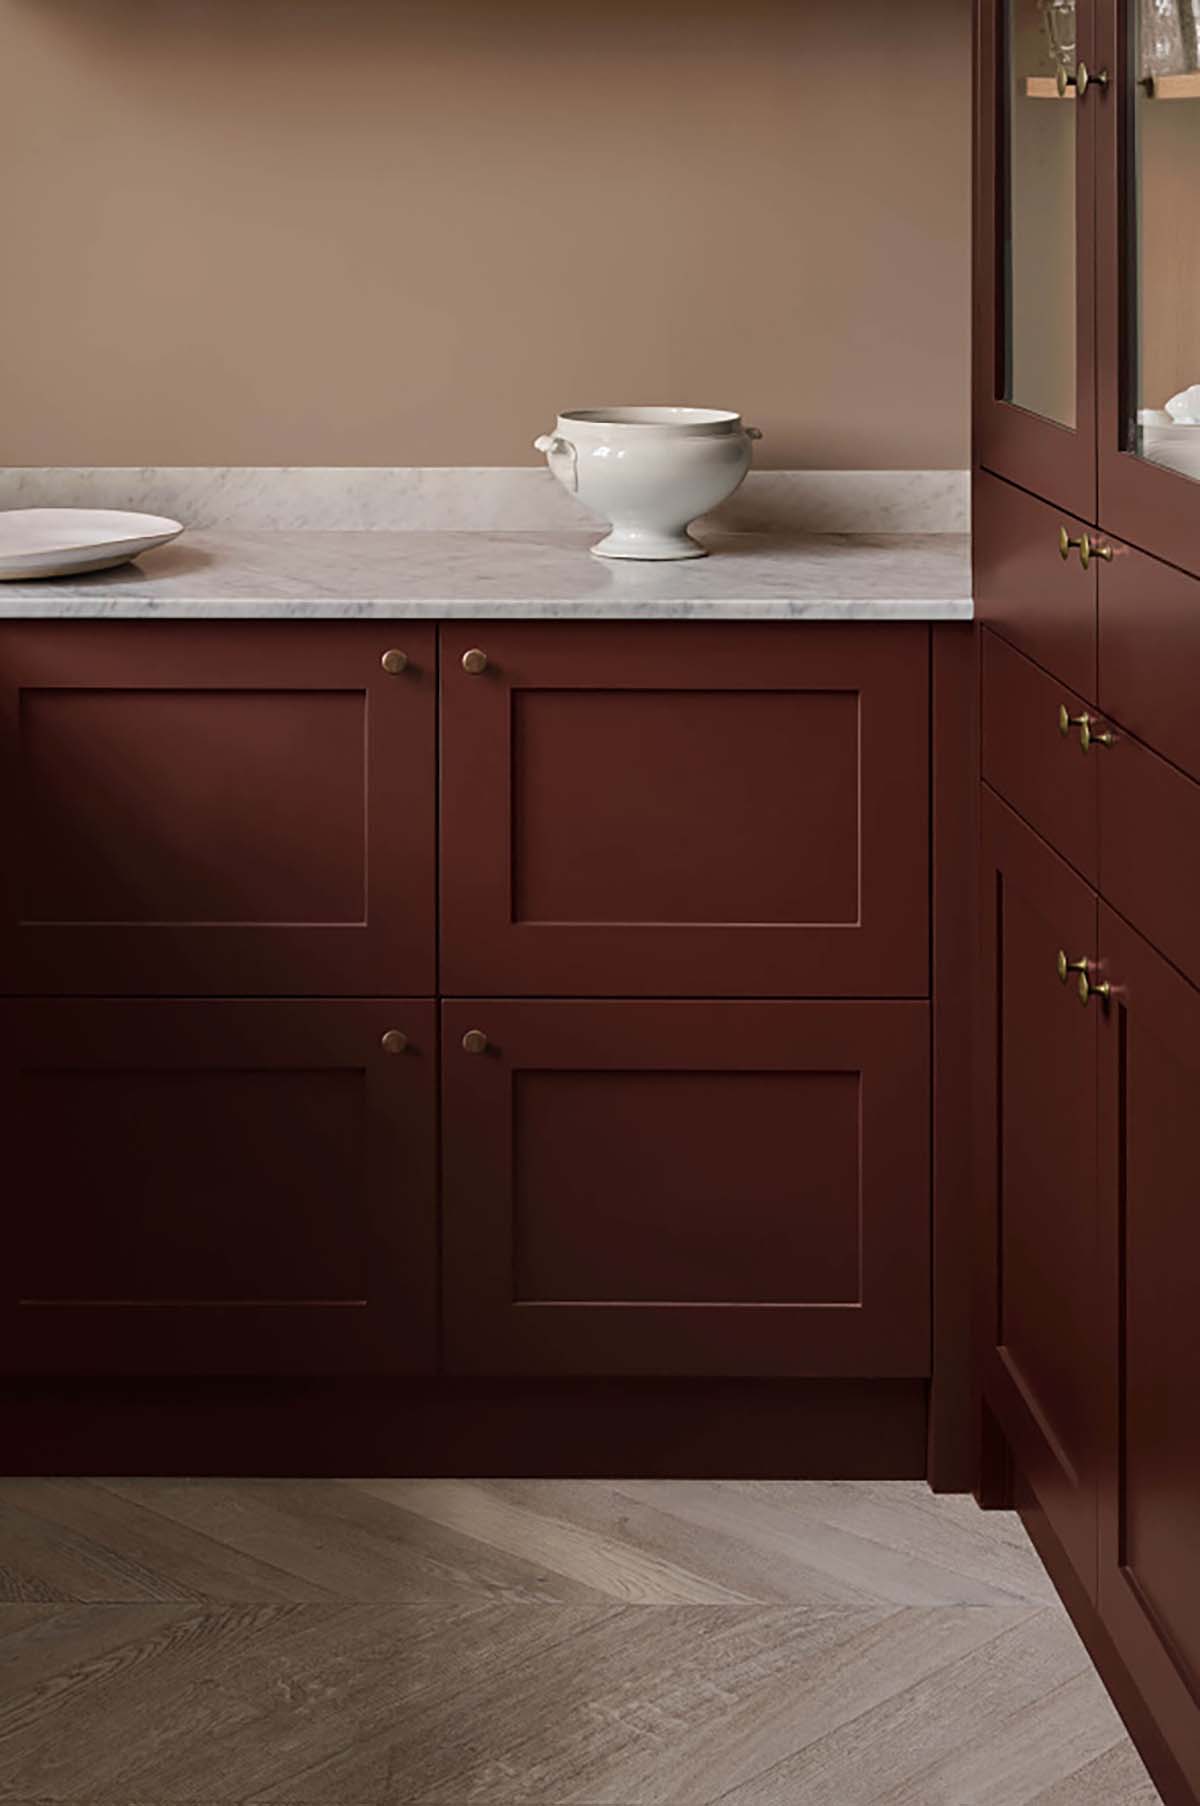 A kitchen with cabinets painted a deep red brown shade, marble counter tops and mink walls